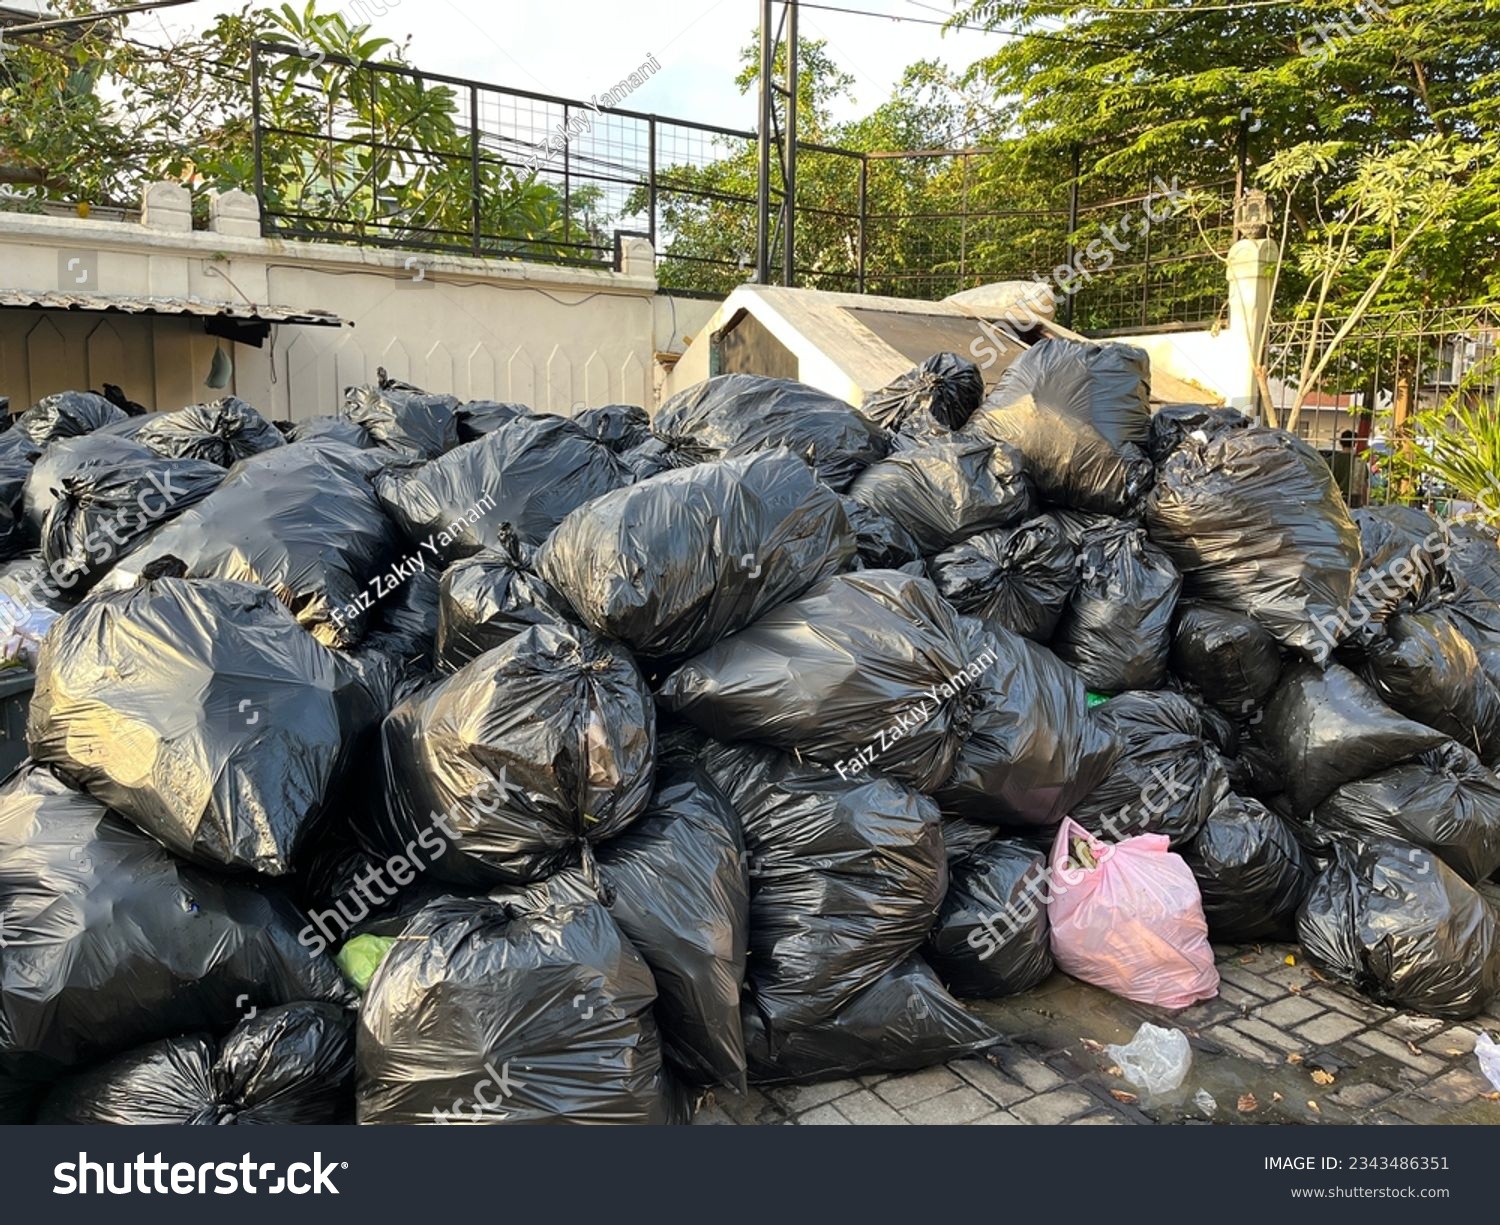 Overloaded dumping ground with pile of black garbage bags on the street  #2343486351